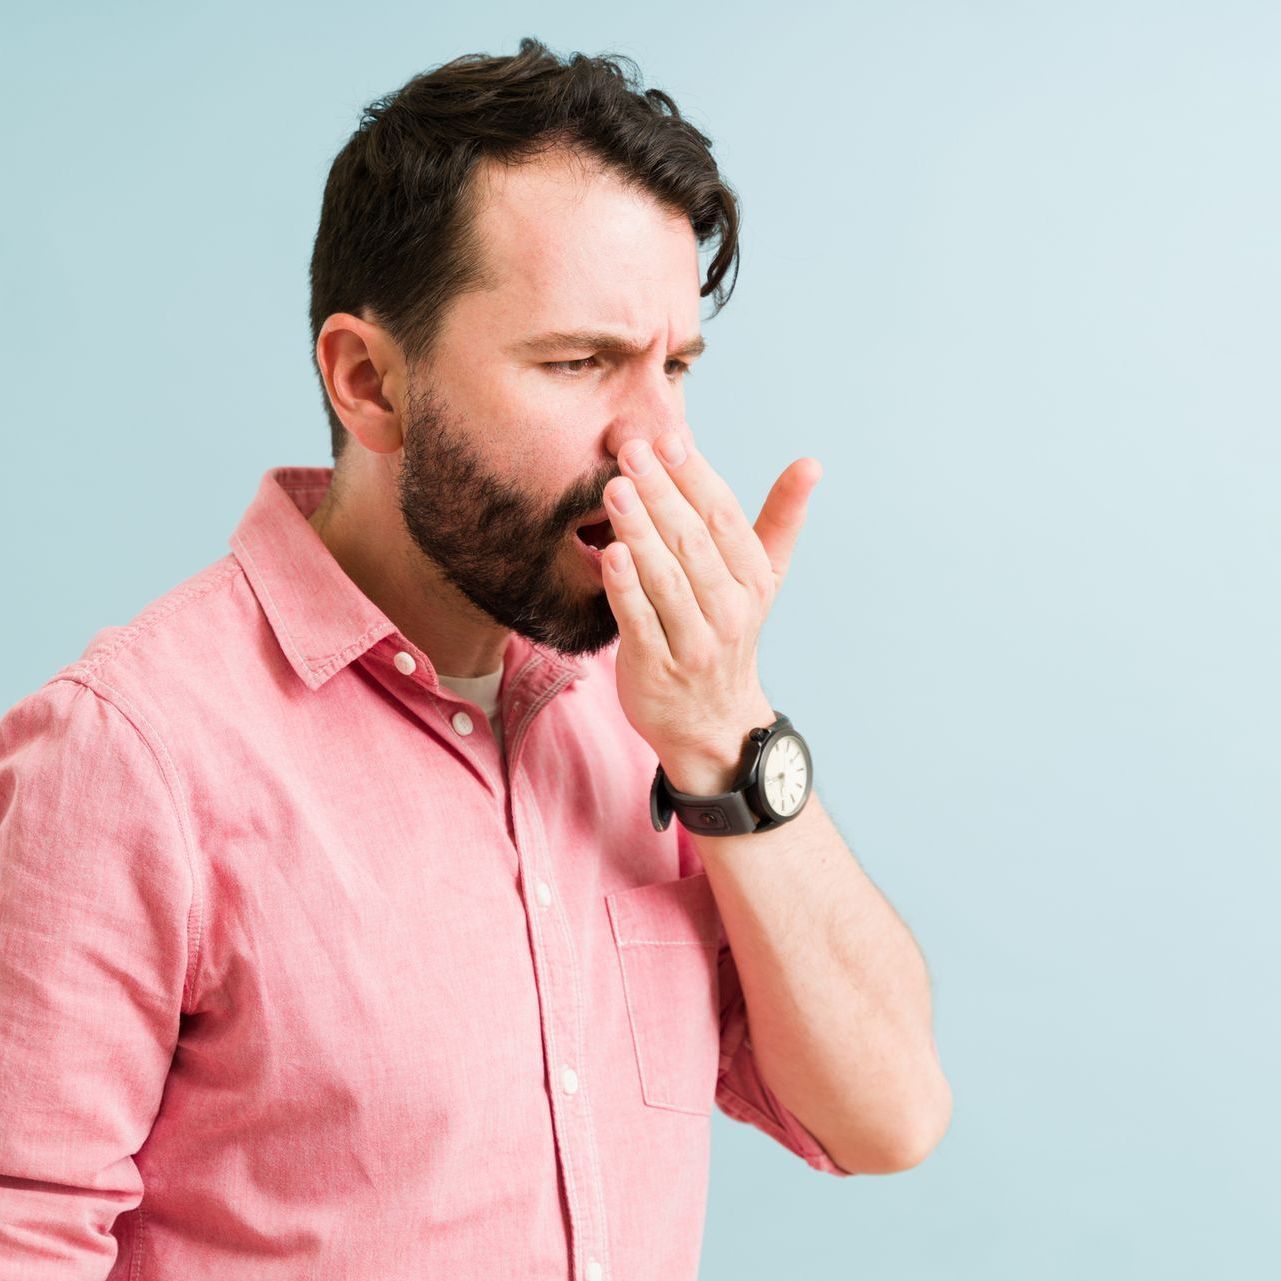 A man in a pink shirt is covering his nose with his hand.